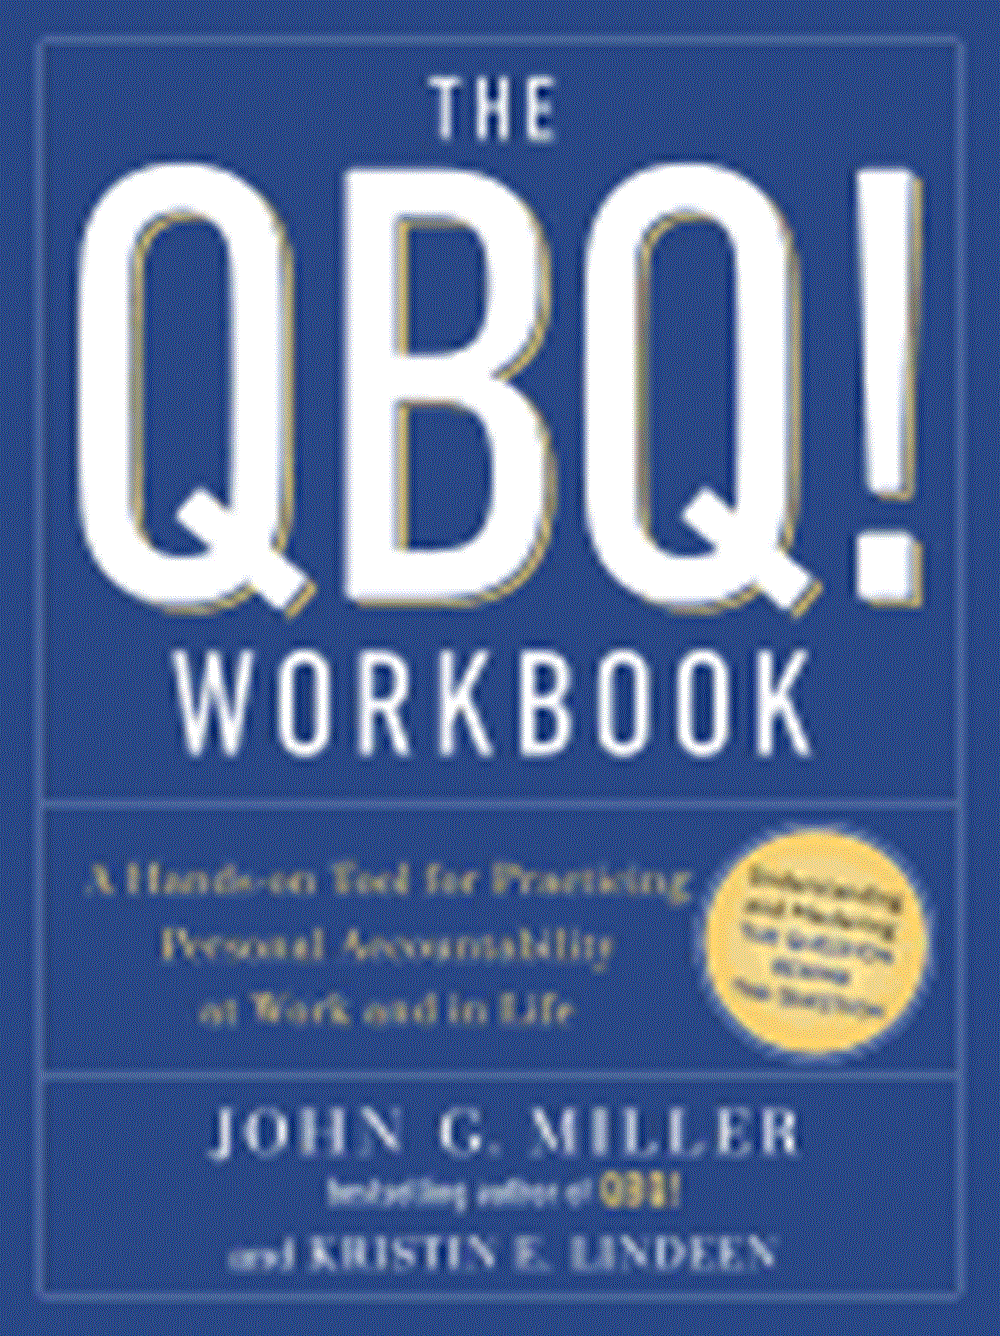 QBQ! Workbook: A Hands-On Tool for Practicing Personal Accountability at Work and in Life